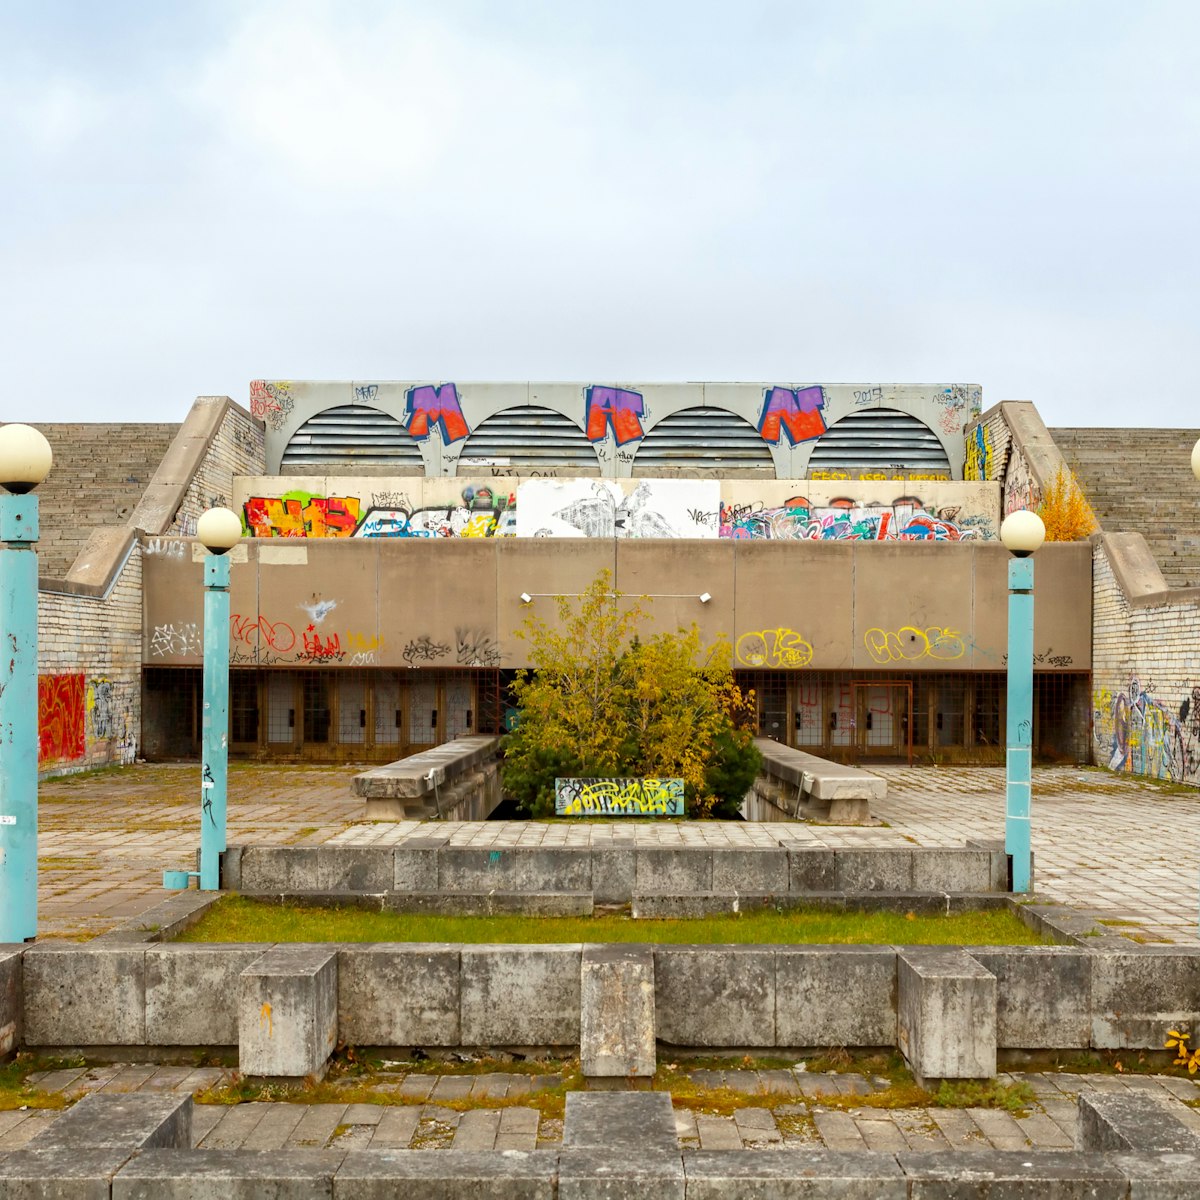 Tallinn, Estonia - 18 October, 2015: The old Soviet sports and cultural complex Linnahall on the shores of the Baltic Sea in Tallinn. A sample of the monumental building in the Soviet Union.; Shutterstock ID 332348396; Your name (First / Last): Gemma Graham; GL account no.: 65050; Netsuite department name: Online Editorial; Full Product or Project name including edition: BiT Destination Page Images